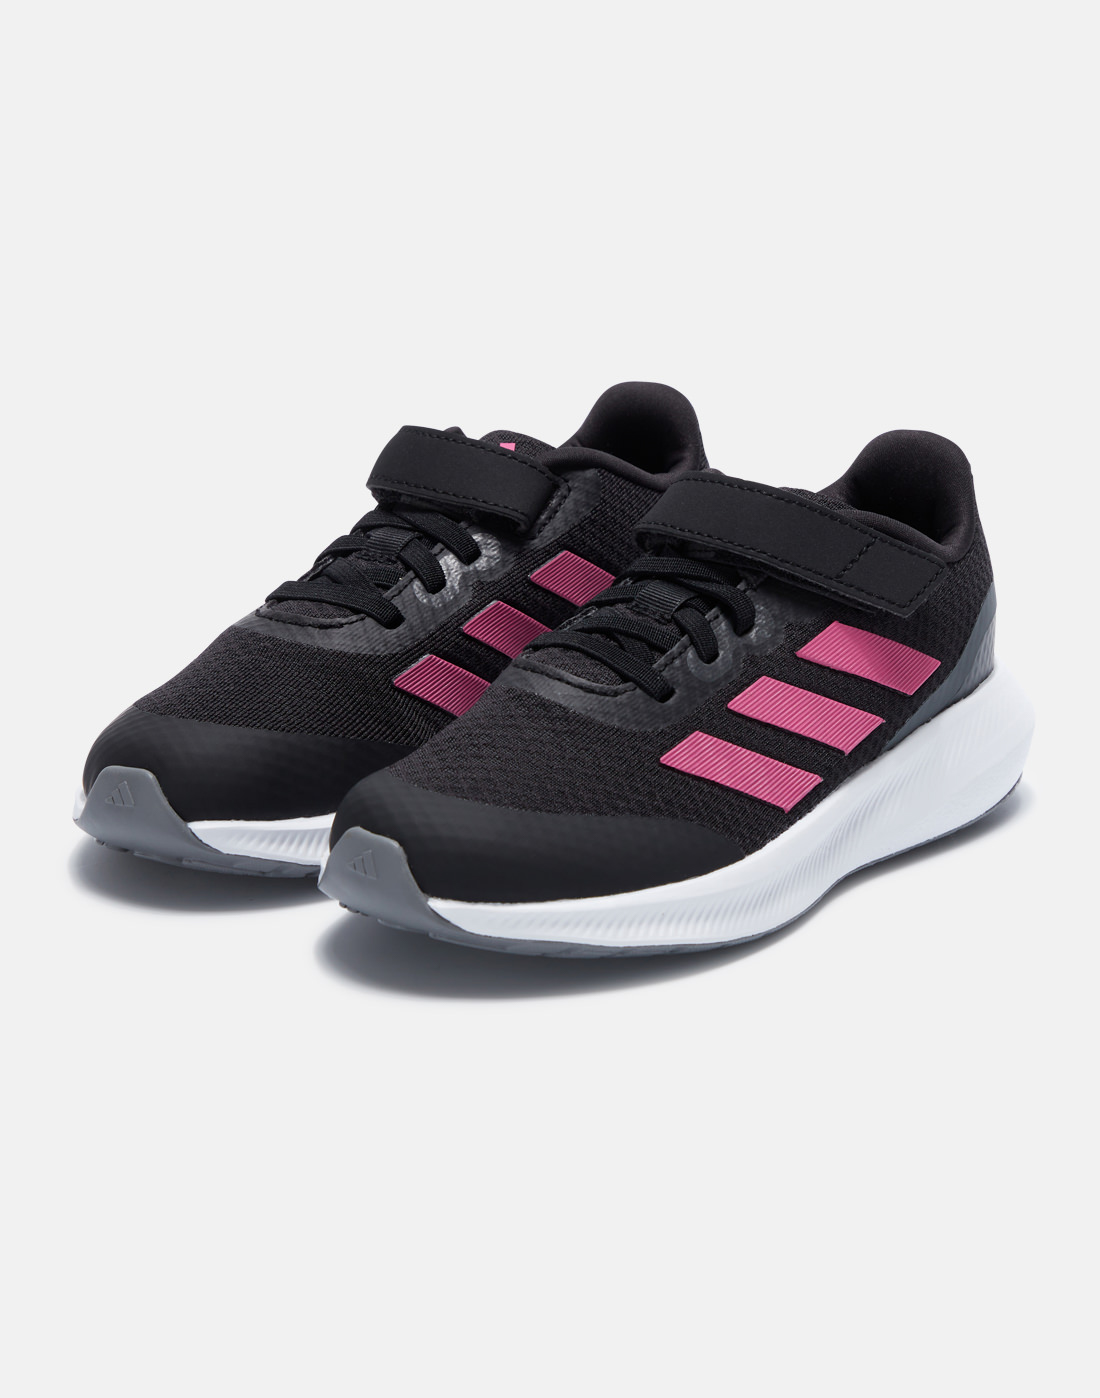 adidas Younger Kids RunFalcon - Black | Life Style Sports IE